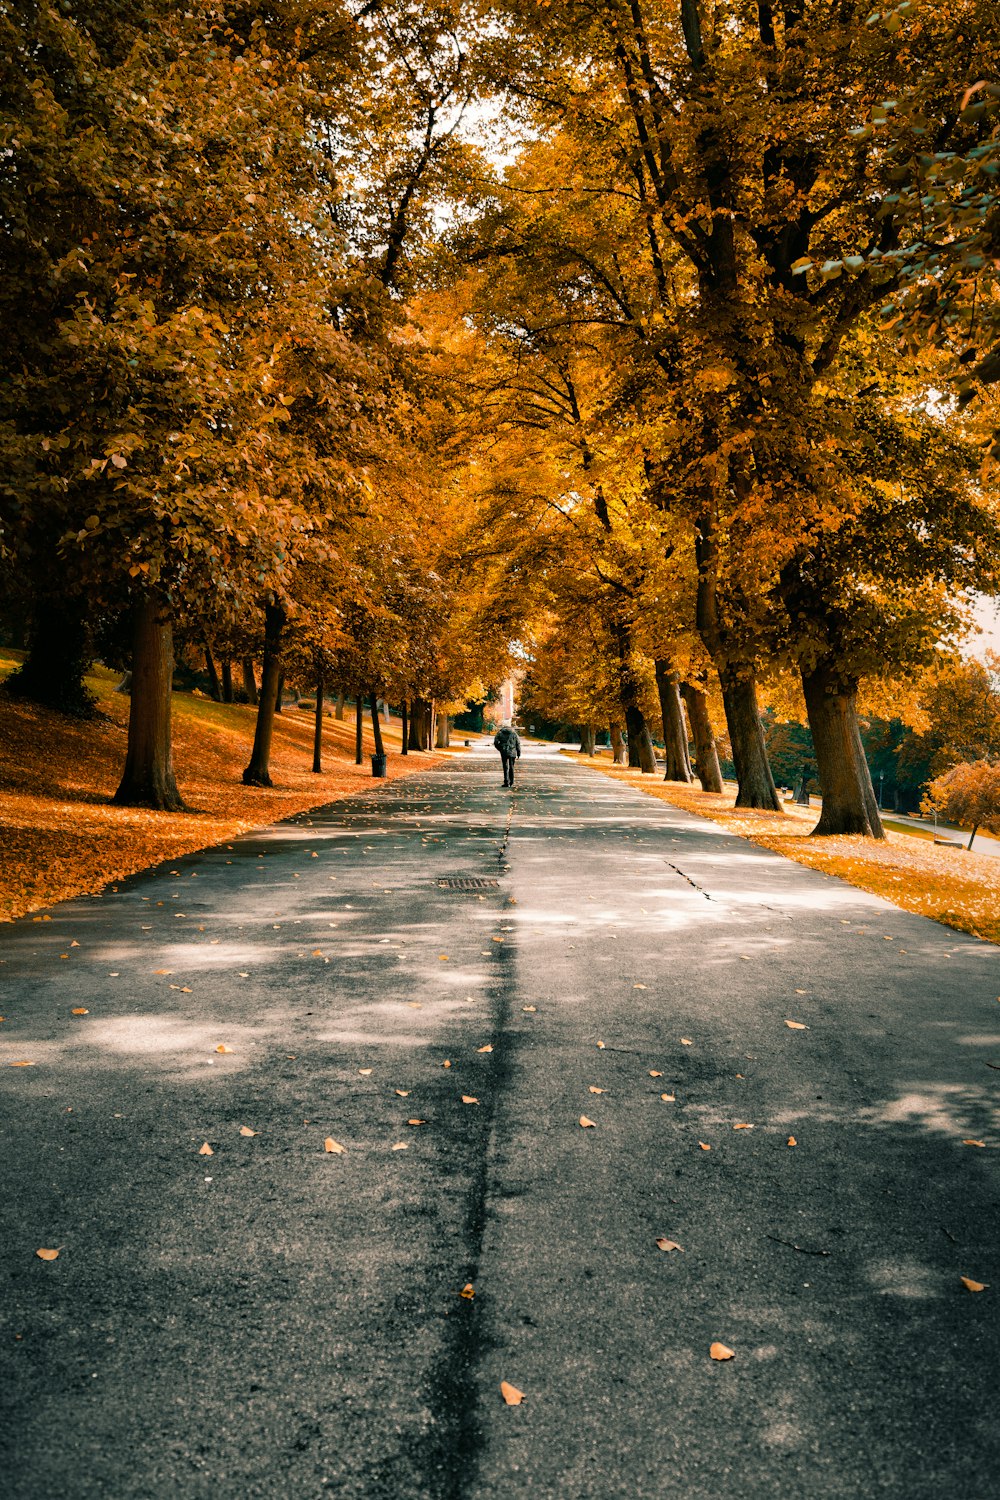 person walking on concrete road surrounded by tall trees